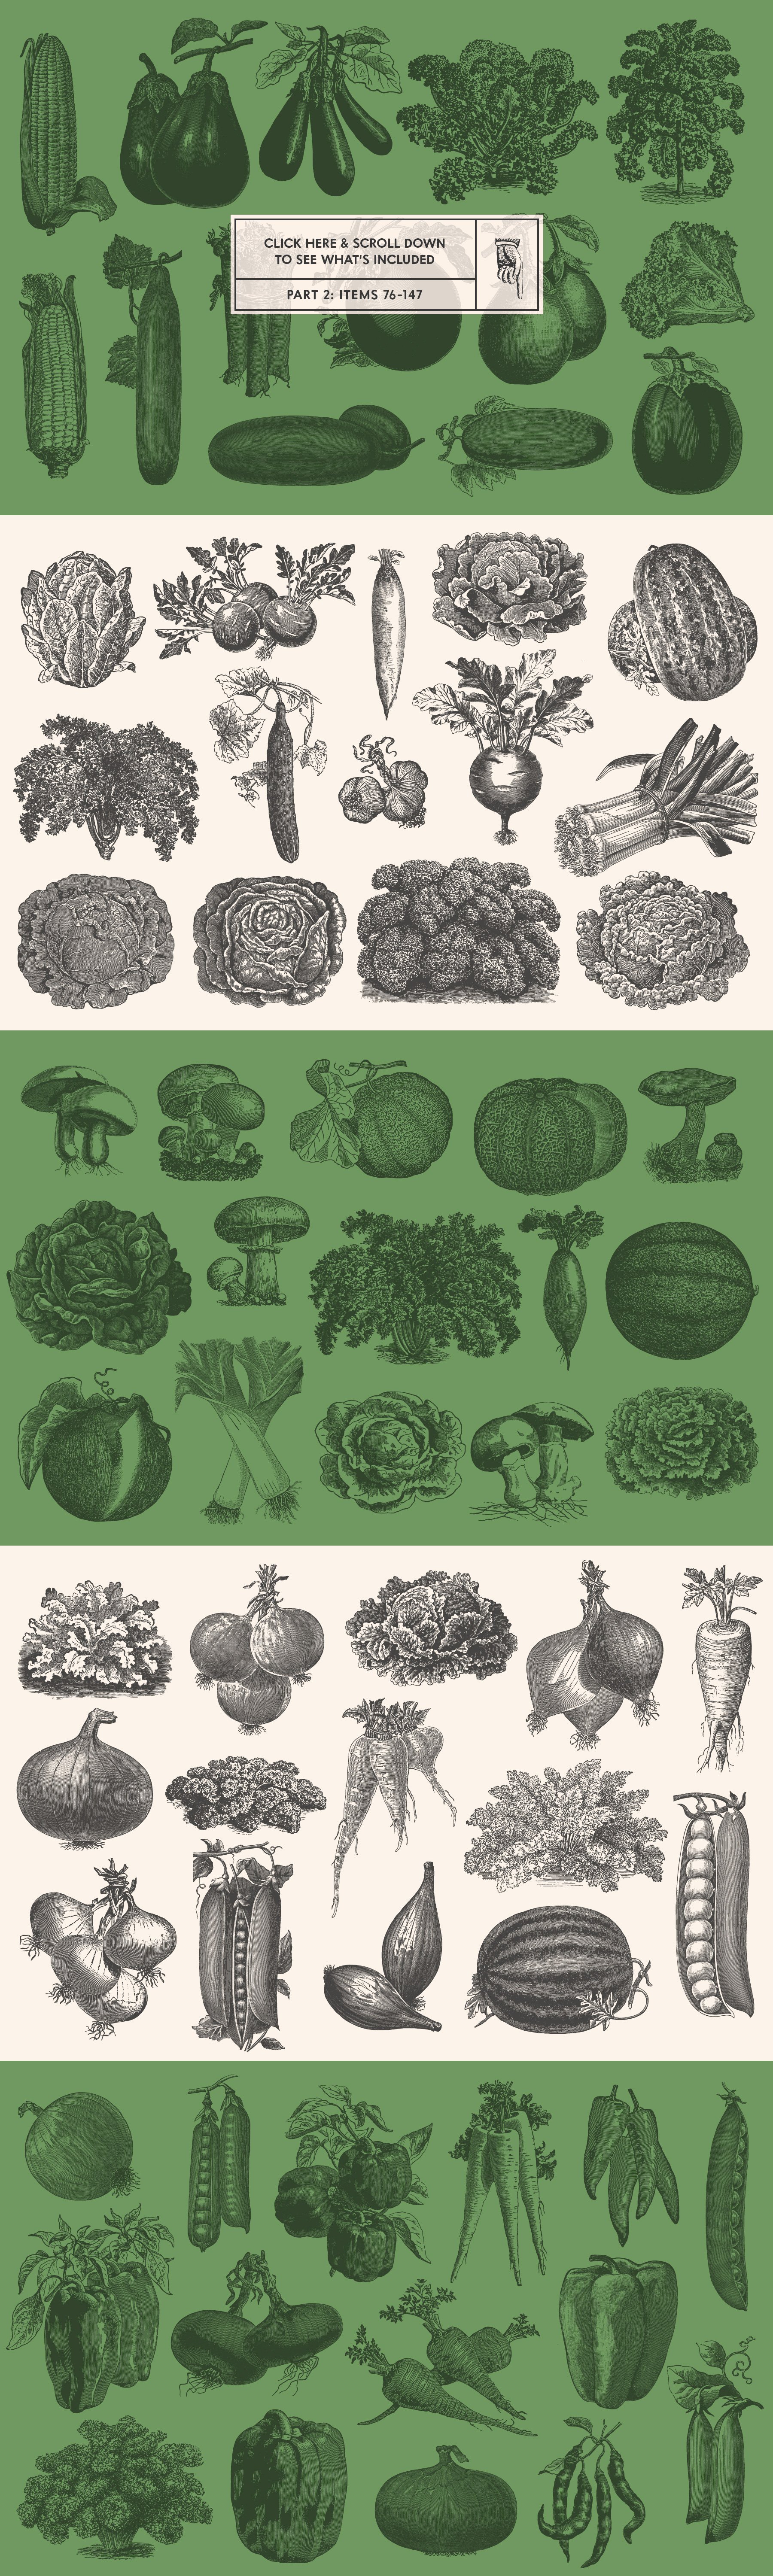 vegetables preview 08 14